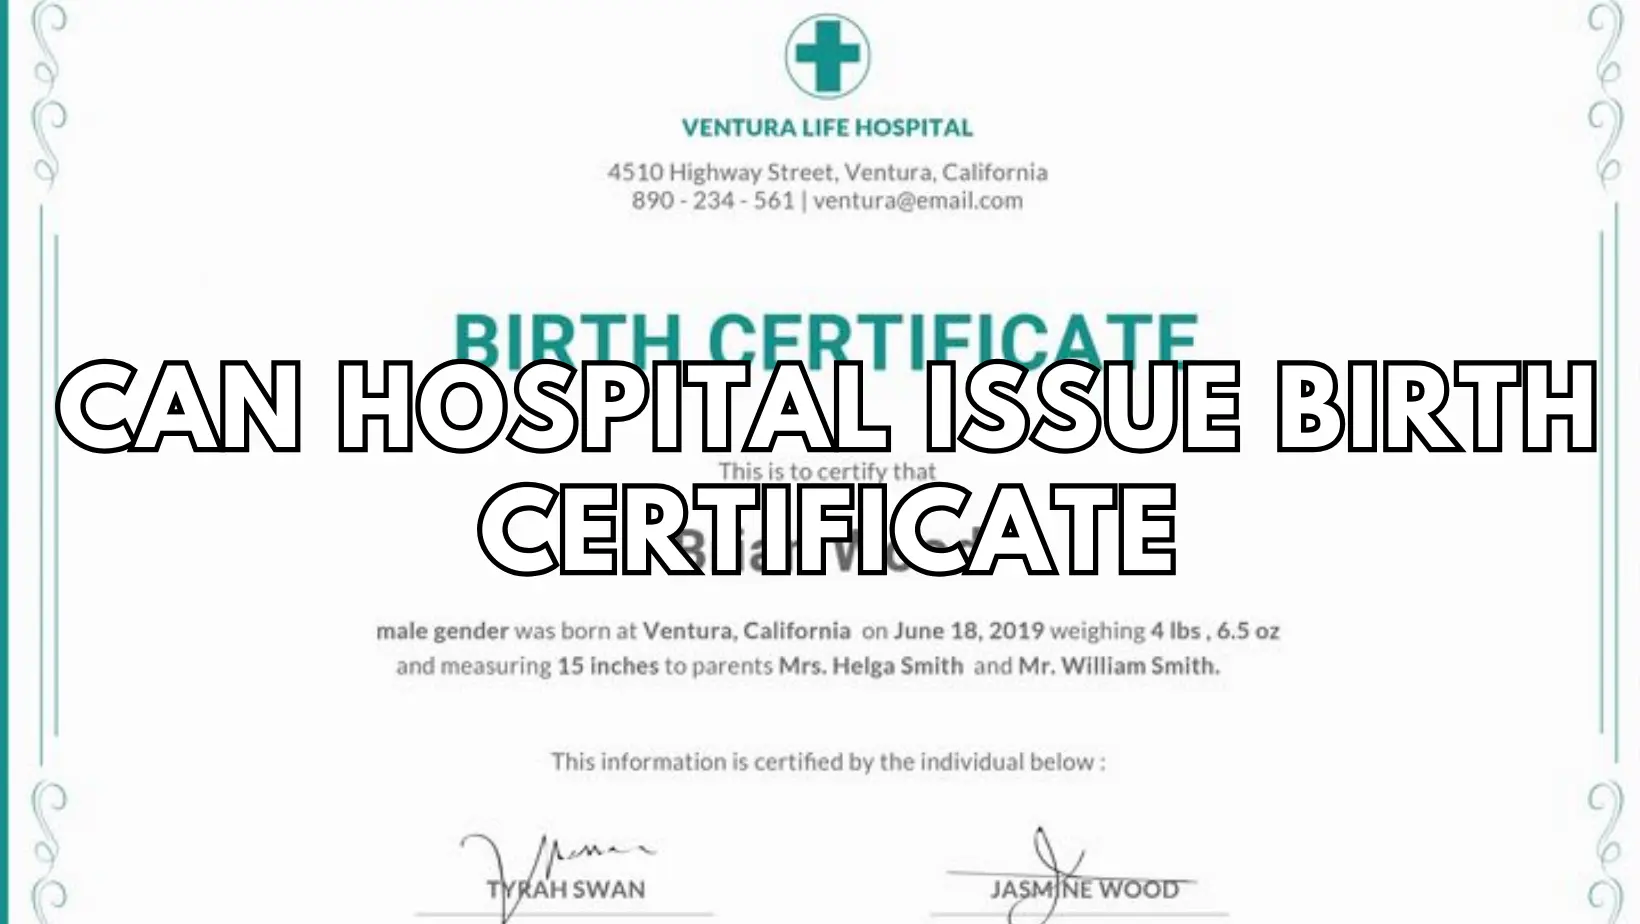 can hospital issue birth certificate featured image